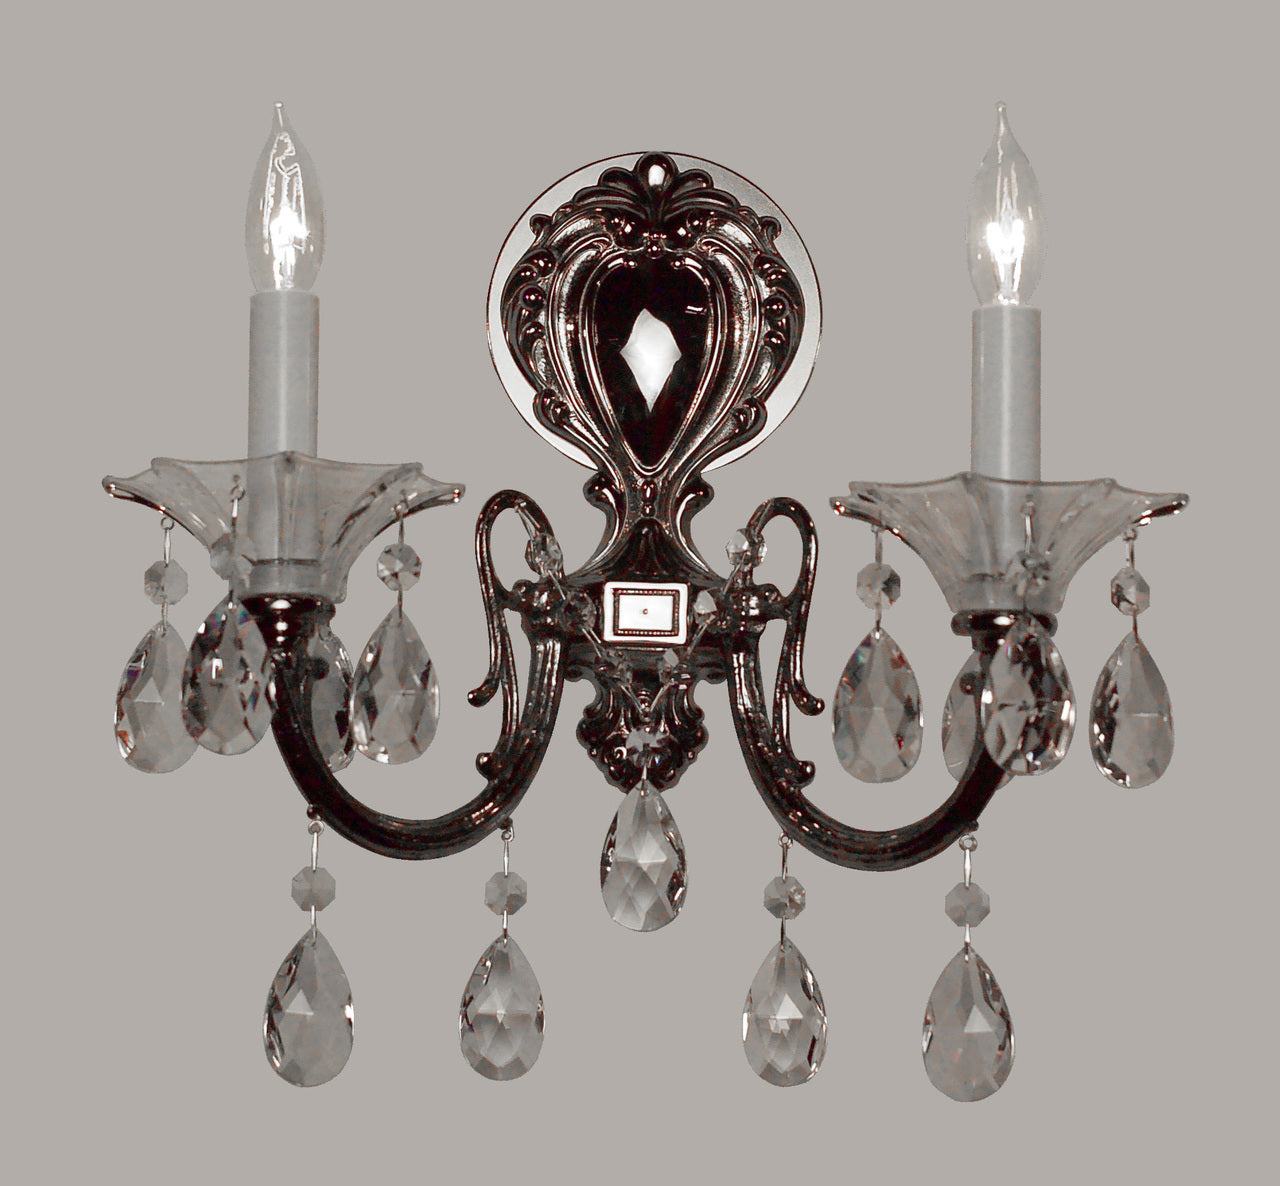 Classic Lighting 57052 CHP SJT Via Lombardi Crystal Wall Sconce in Champagne Pearl (Imported from Spain)